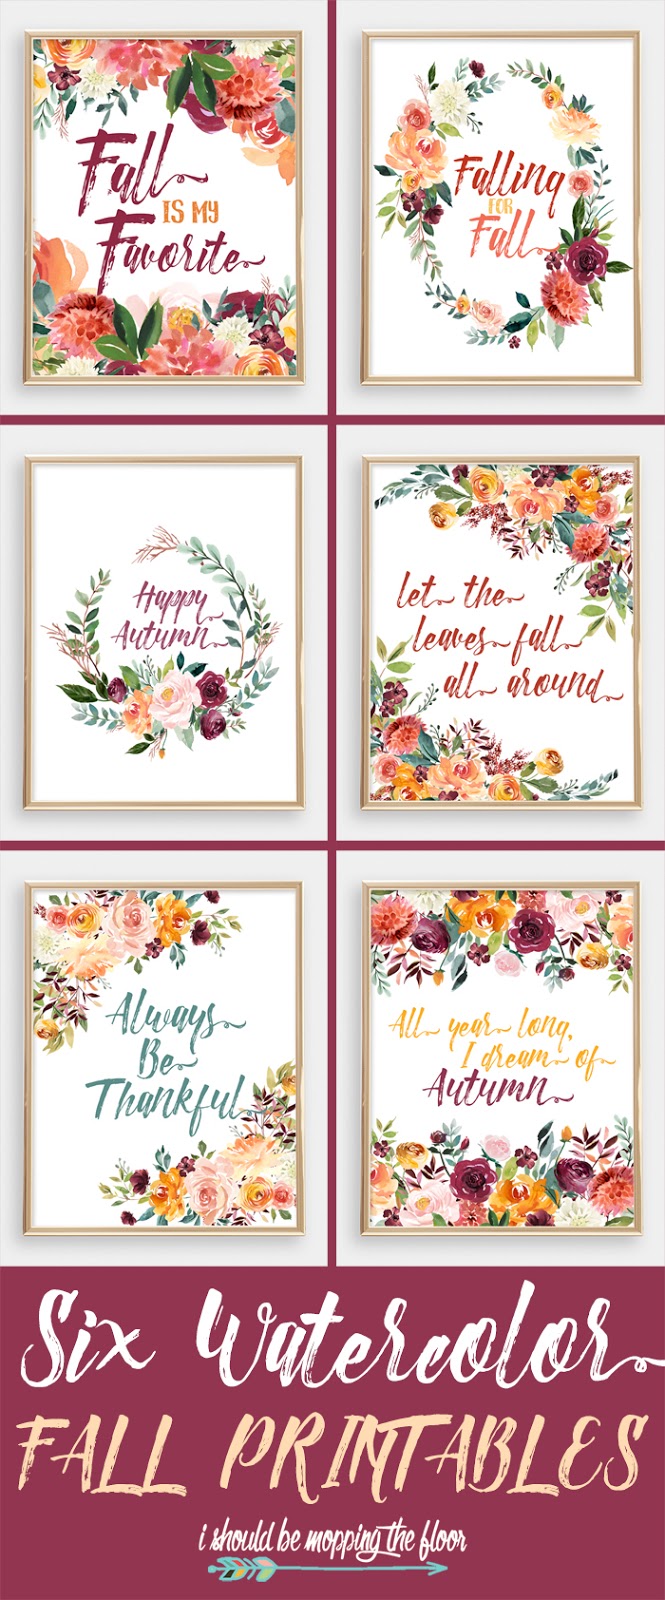 Six Watercolor Fall Printables | These gorgeous watercolor printables are layered in fall florals and foliage. They're breathtaking and perfect with all autumn decor.